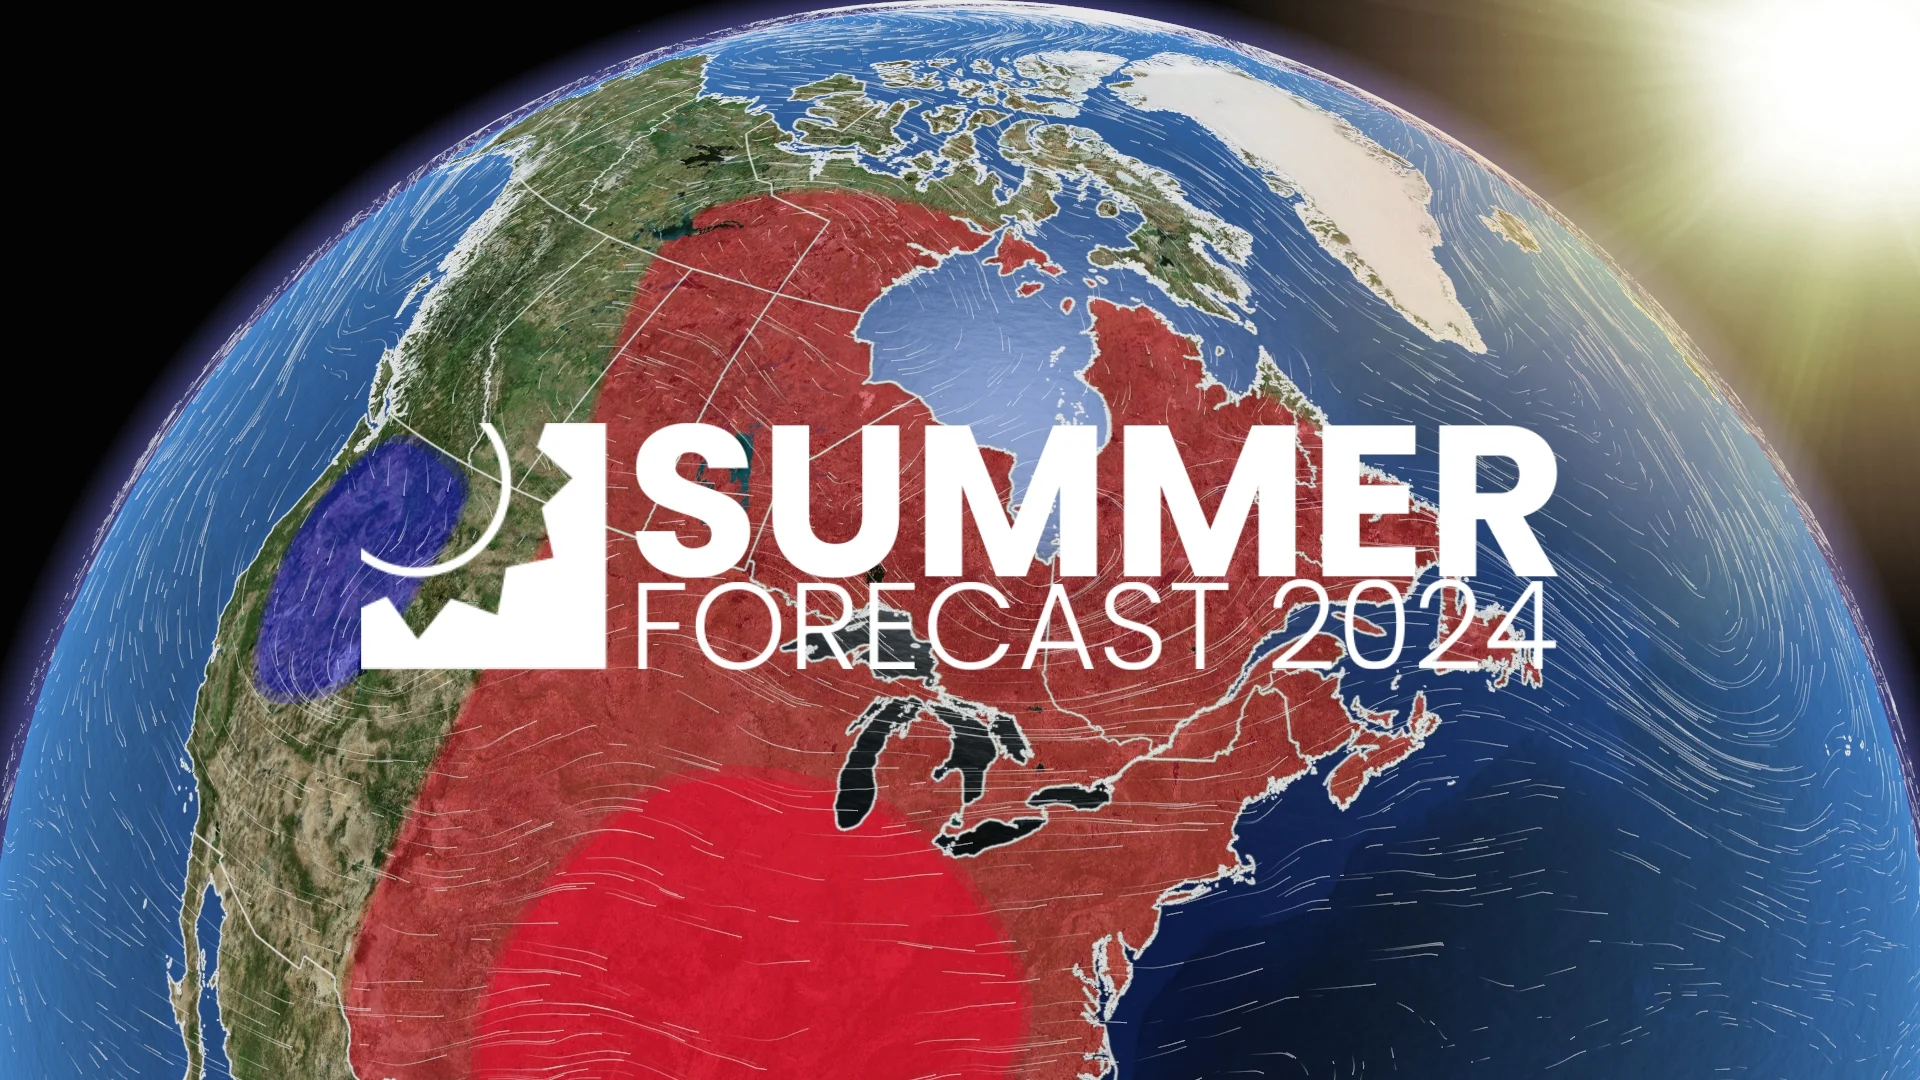 B.C. will see less persistent and severe heat in the coming months. See the summer forecast, here